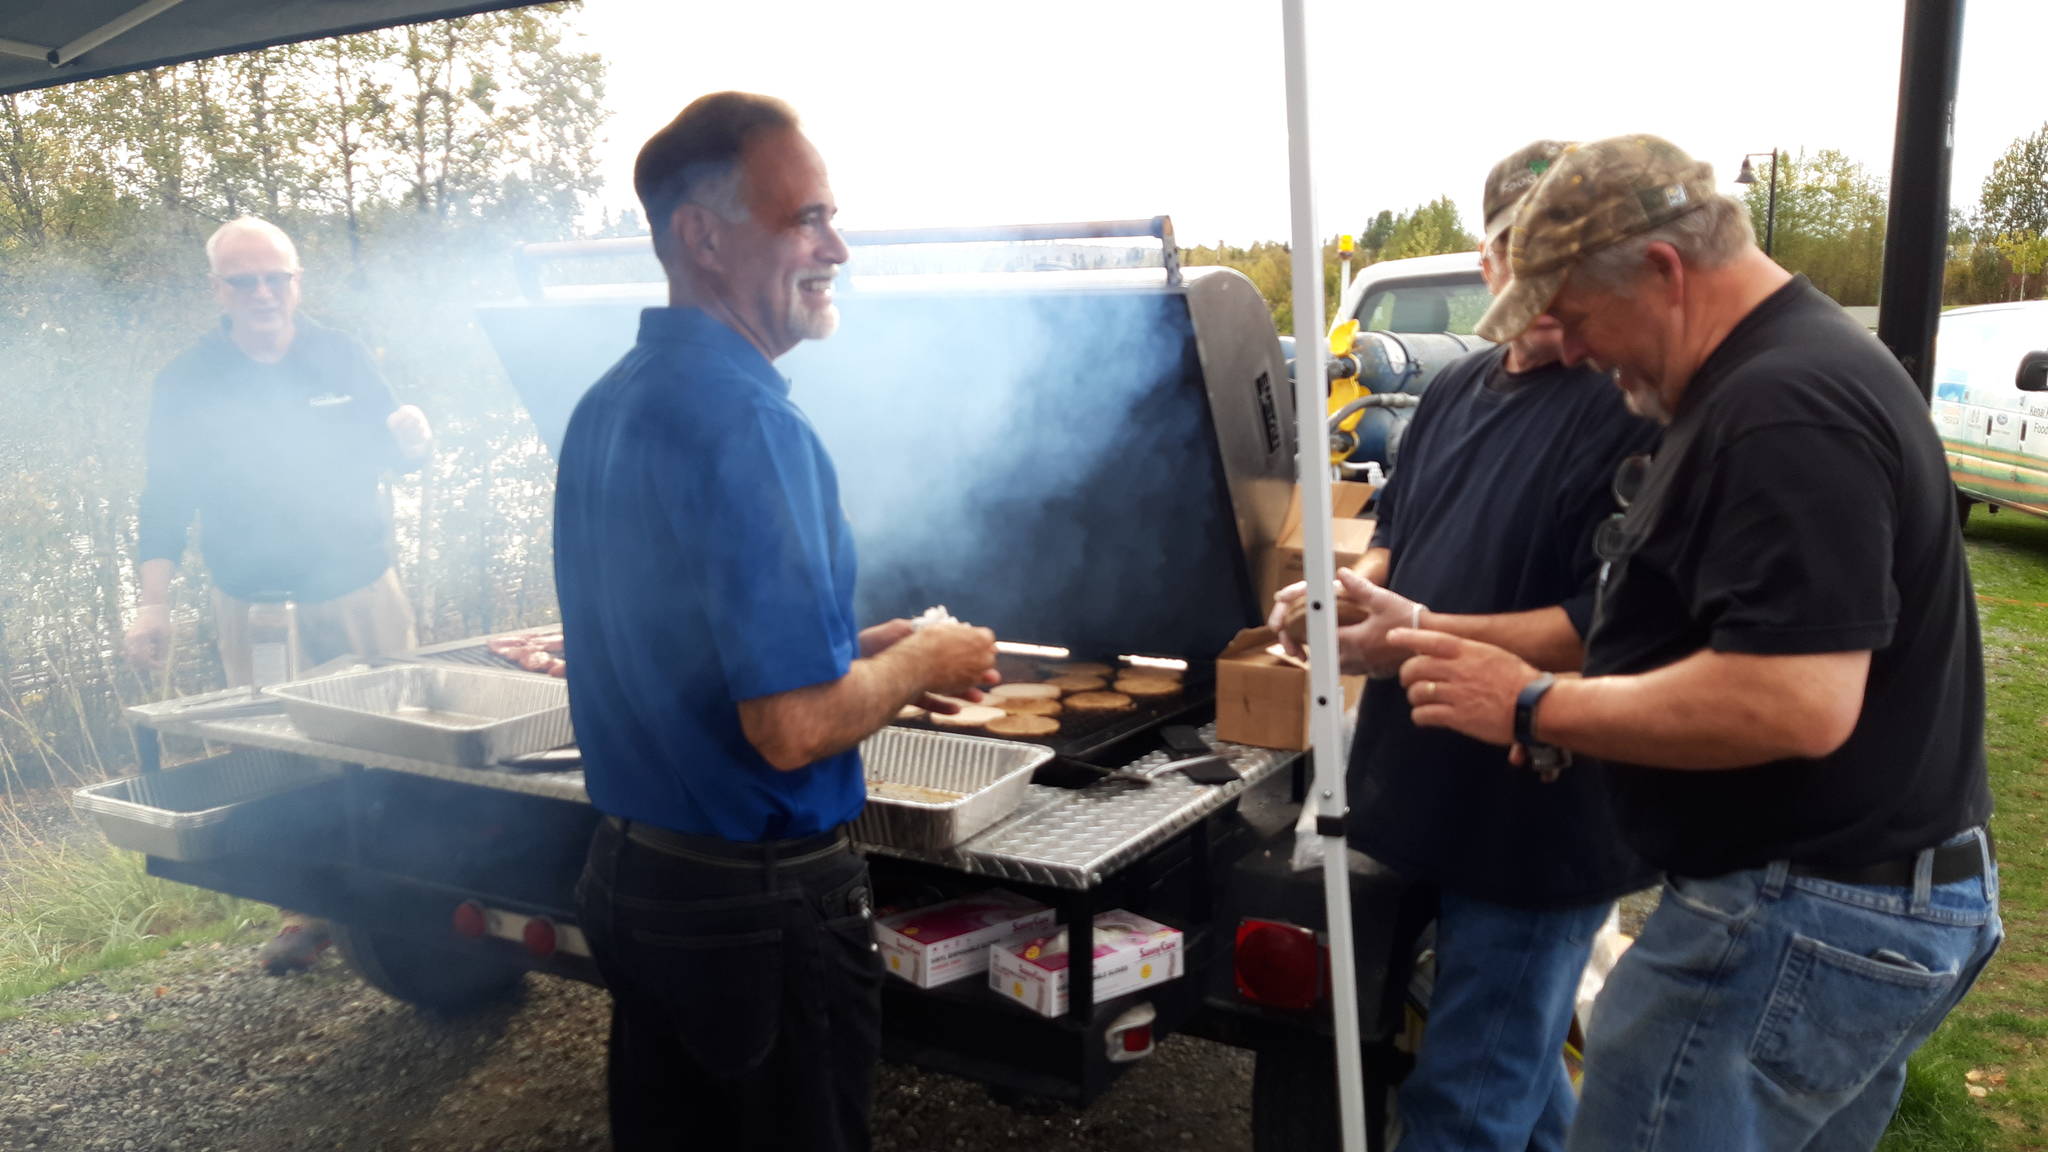 Sen. Peter Micciche, R-Soldotna, mans the grill with other volunteers during the first responder appreciation barbecue at Soldotna Creek Park on Monday, Sept. 9, 2019 in Soldotna, Alaska. (Photo by Brian Mazurek/Peninsula Clarion)